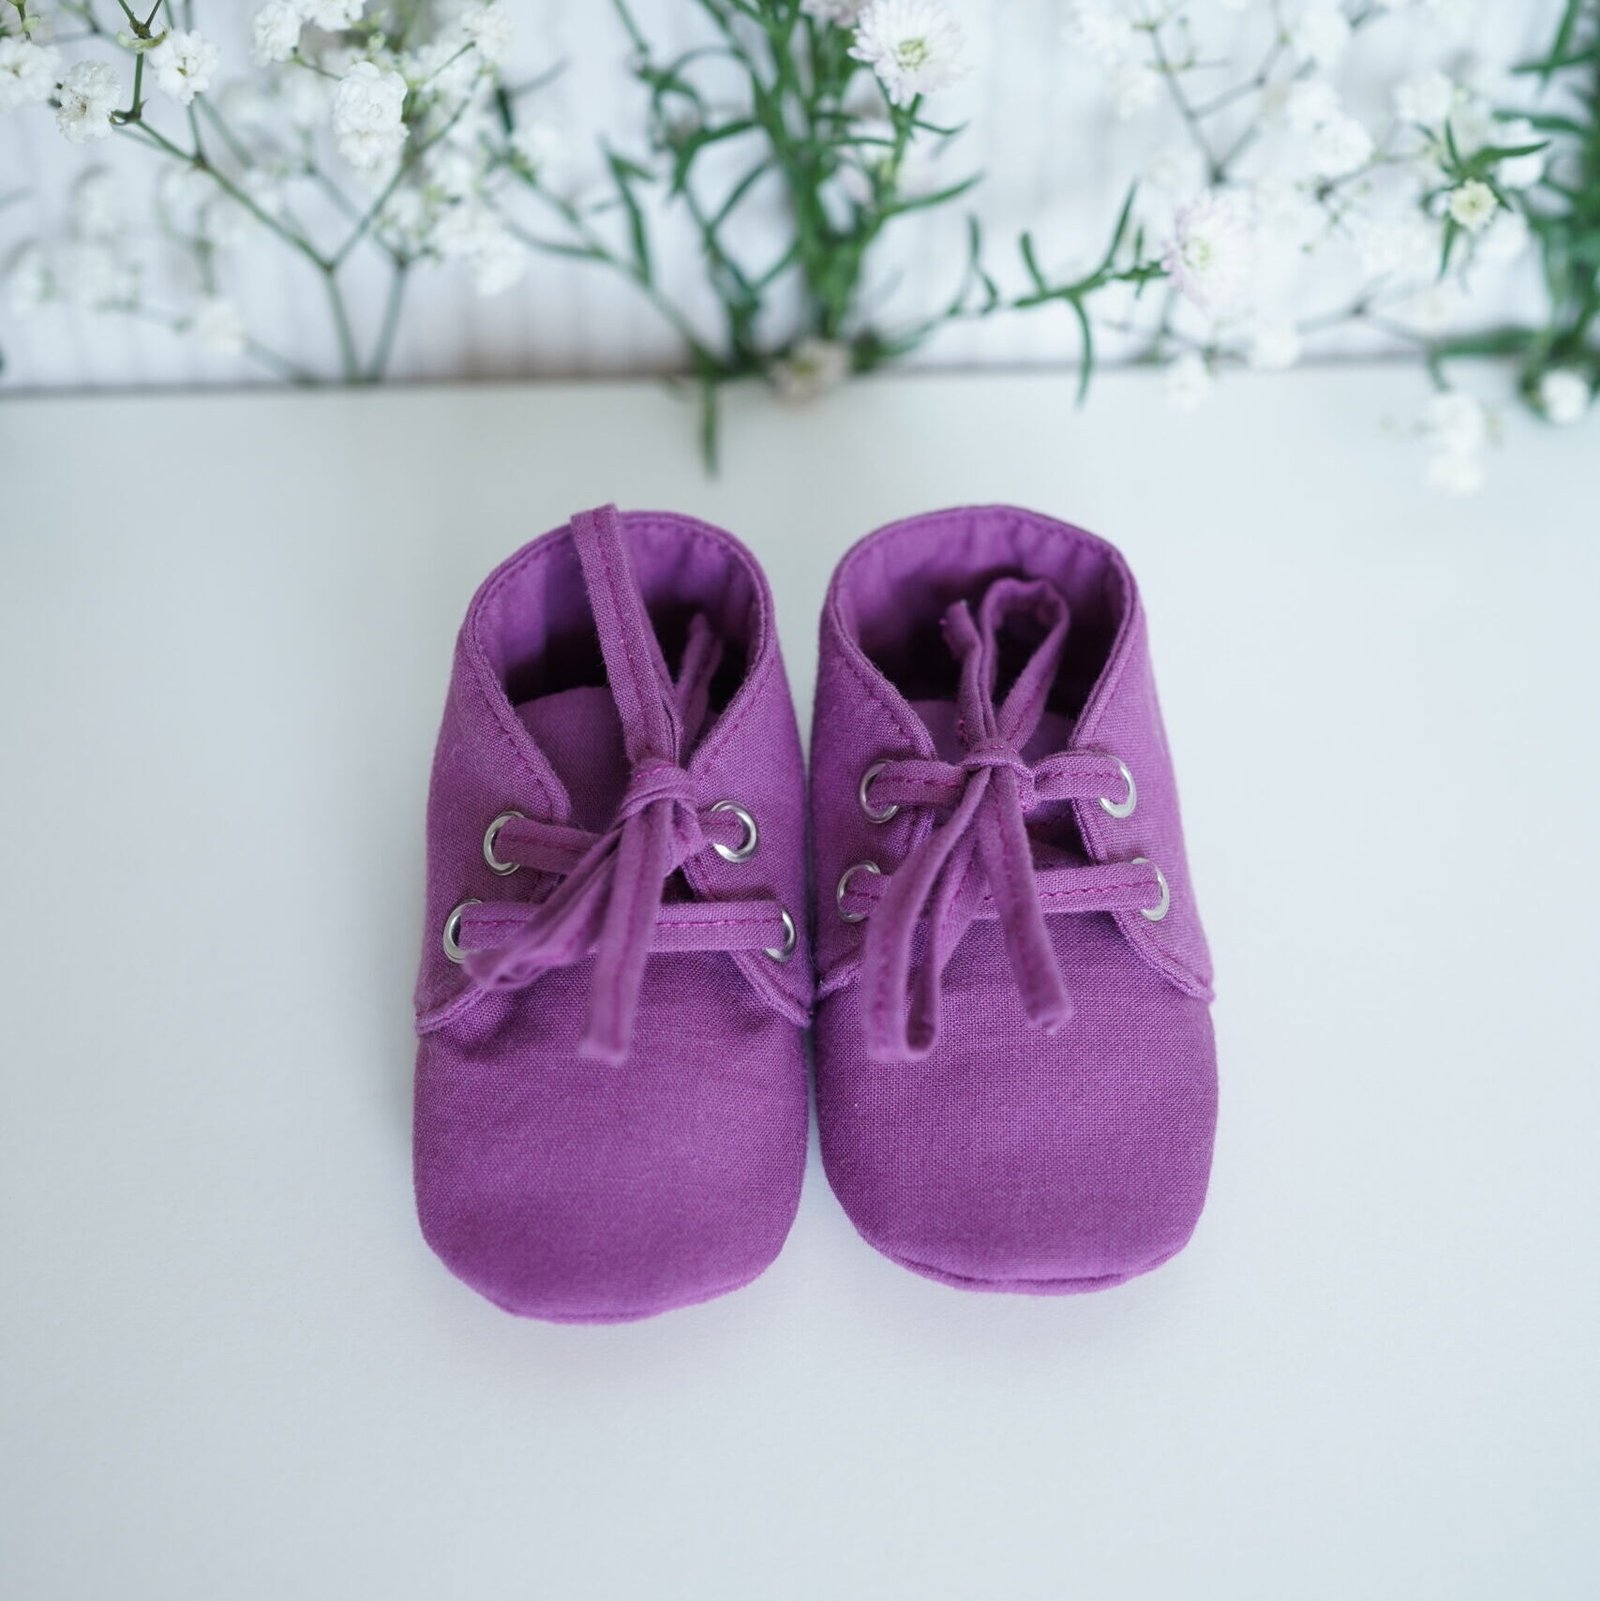 Chaussons violets